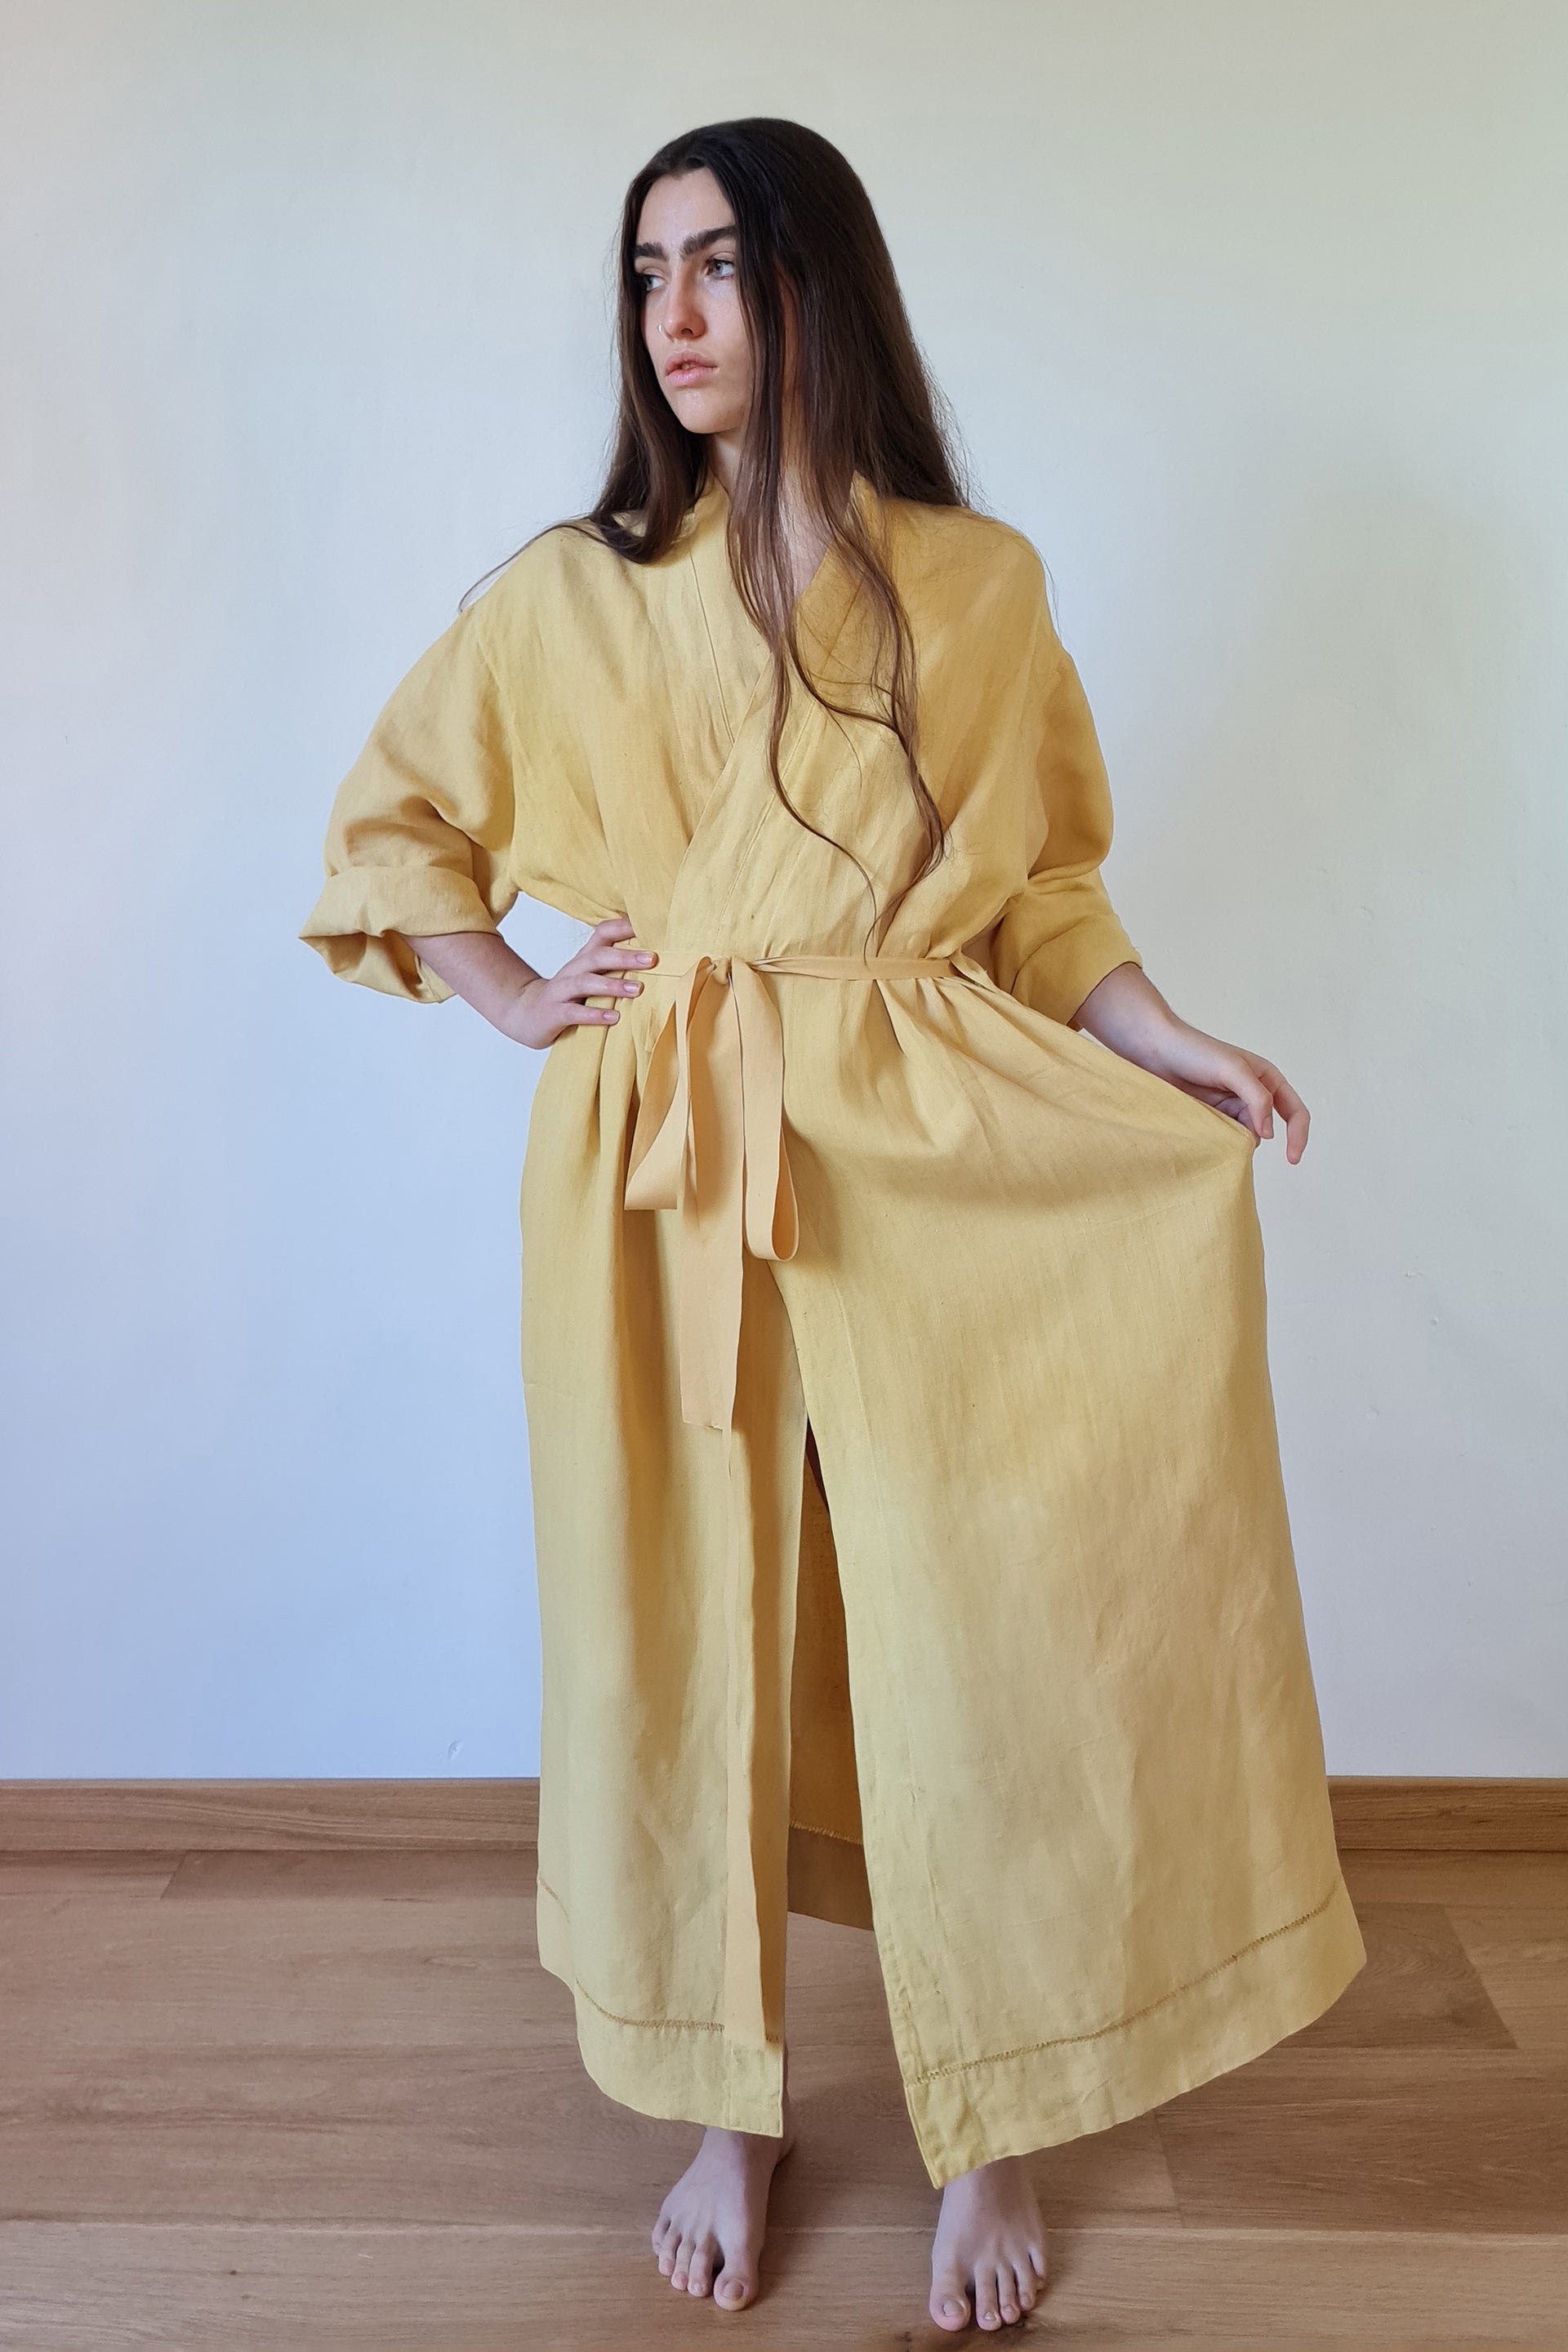 HAND DYED REPURPOSED BED LINEN - ROBE DRESS IN COTTON